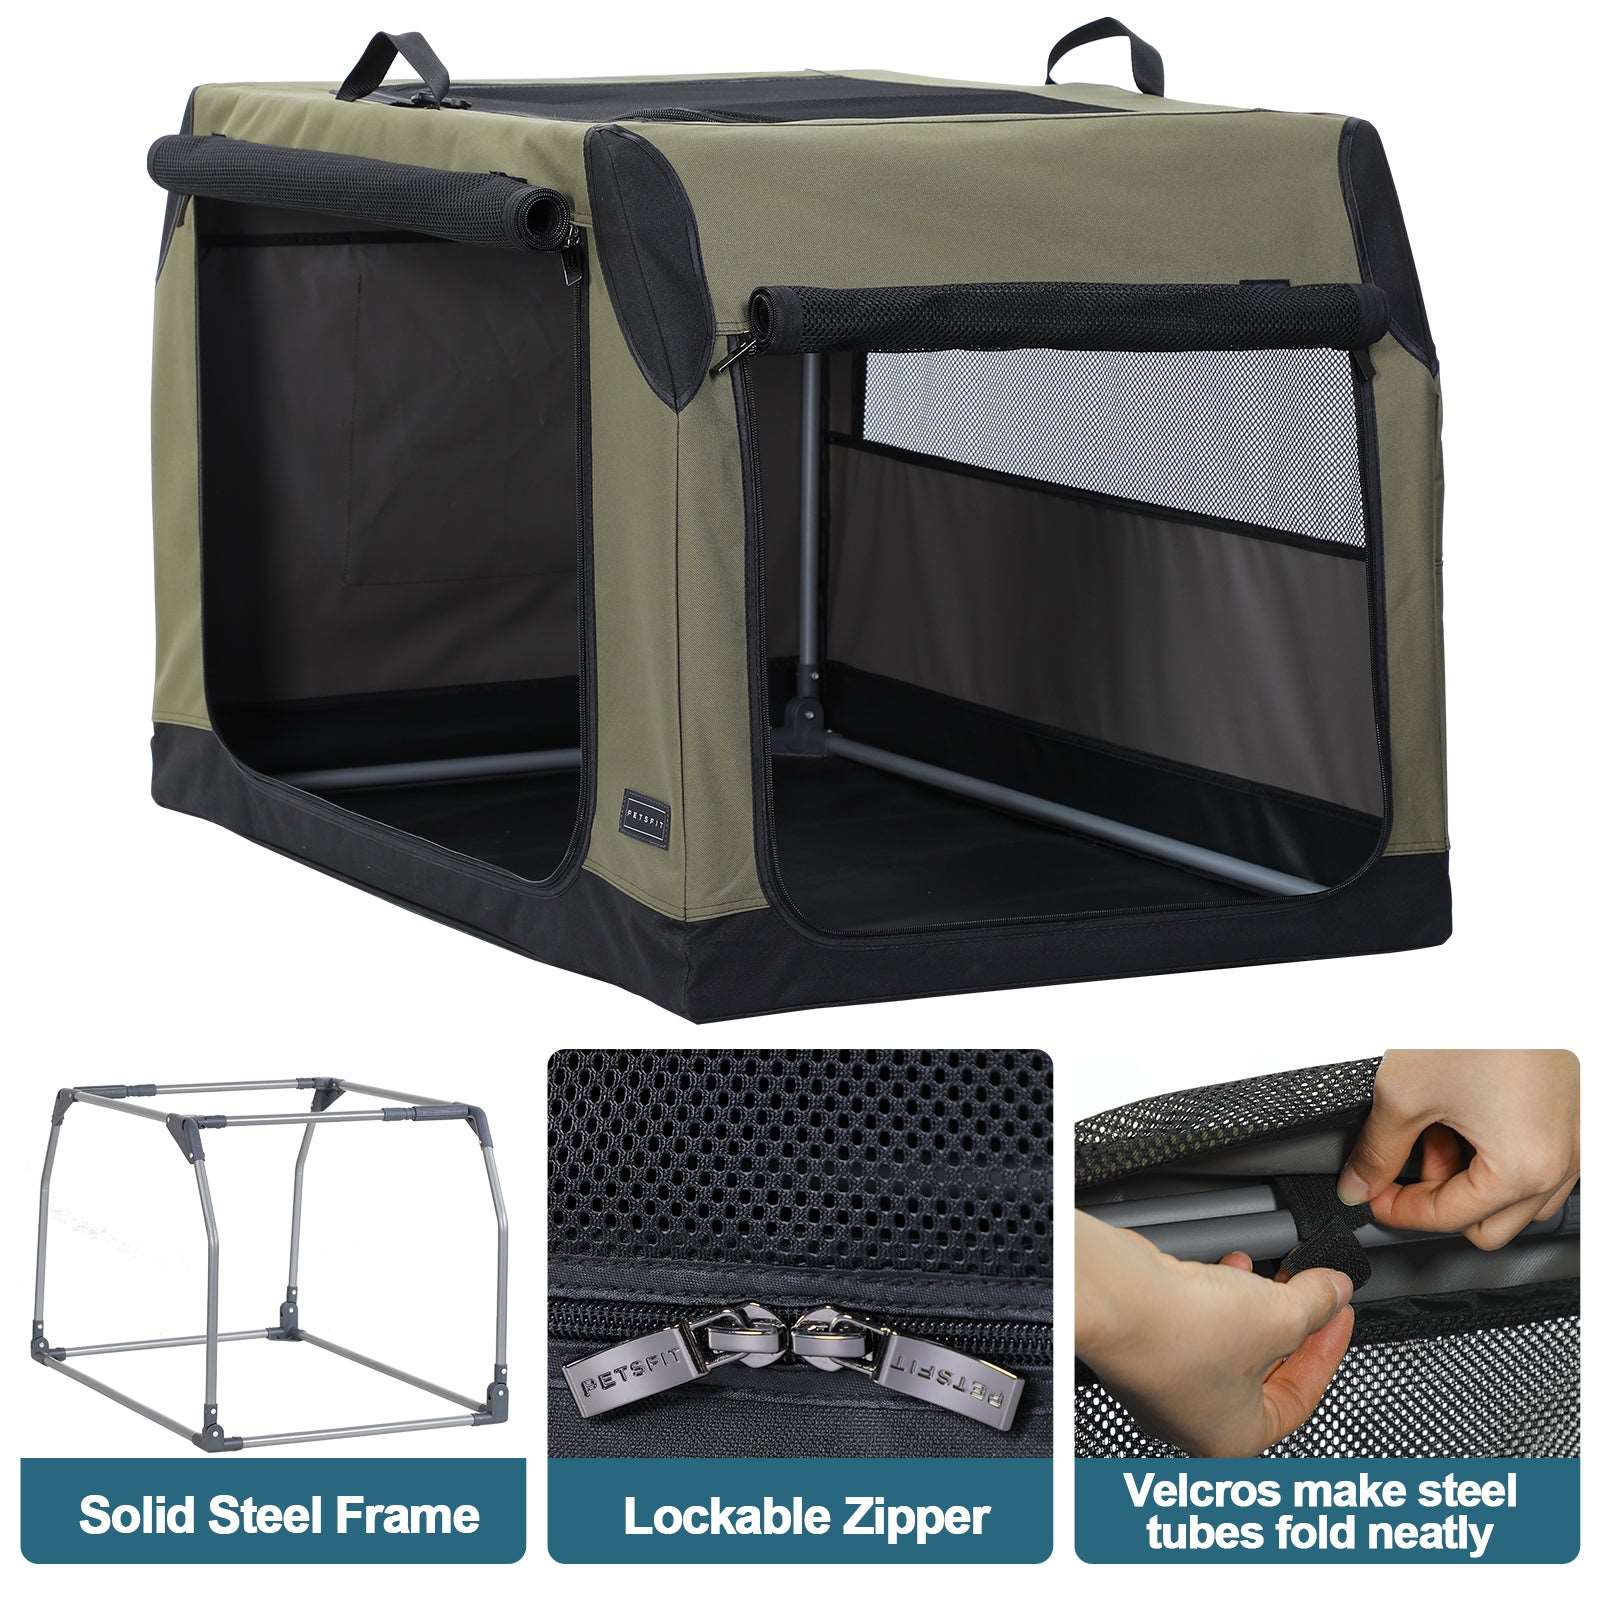 Petsfit-Soft-Sided-Portable-Travel-Kennel-for-Pet-03